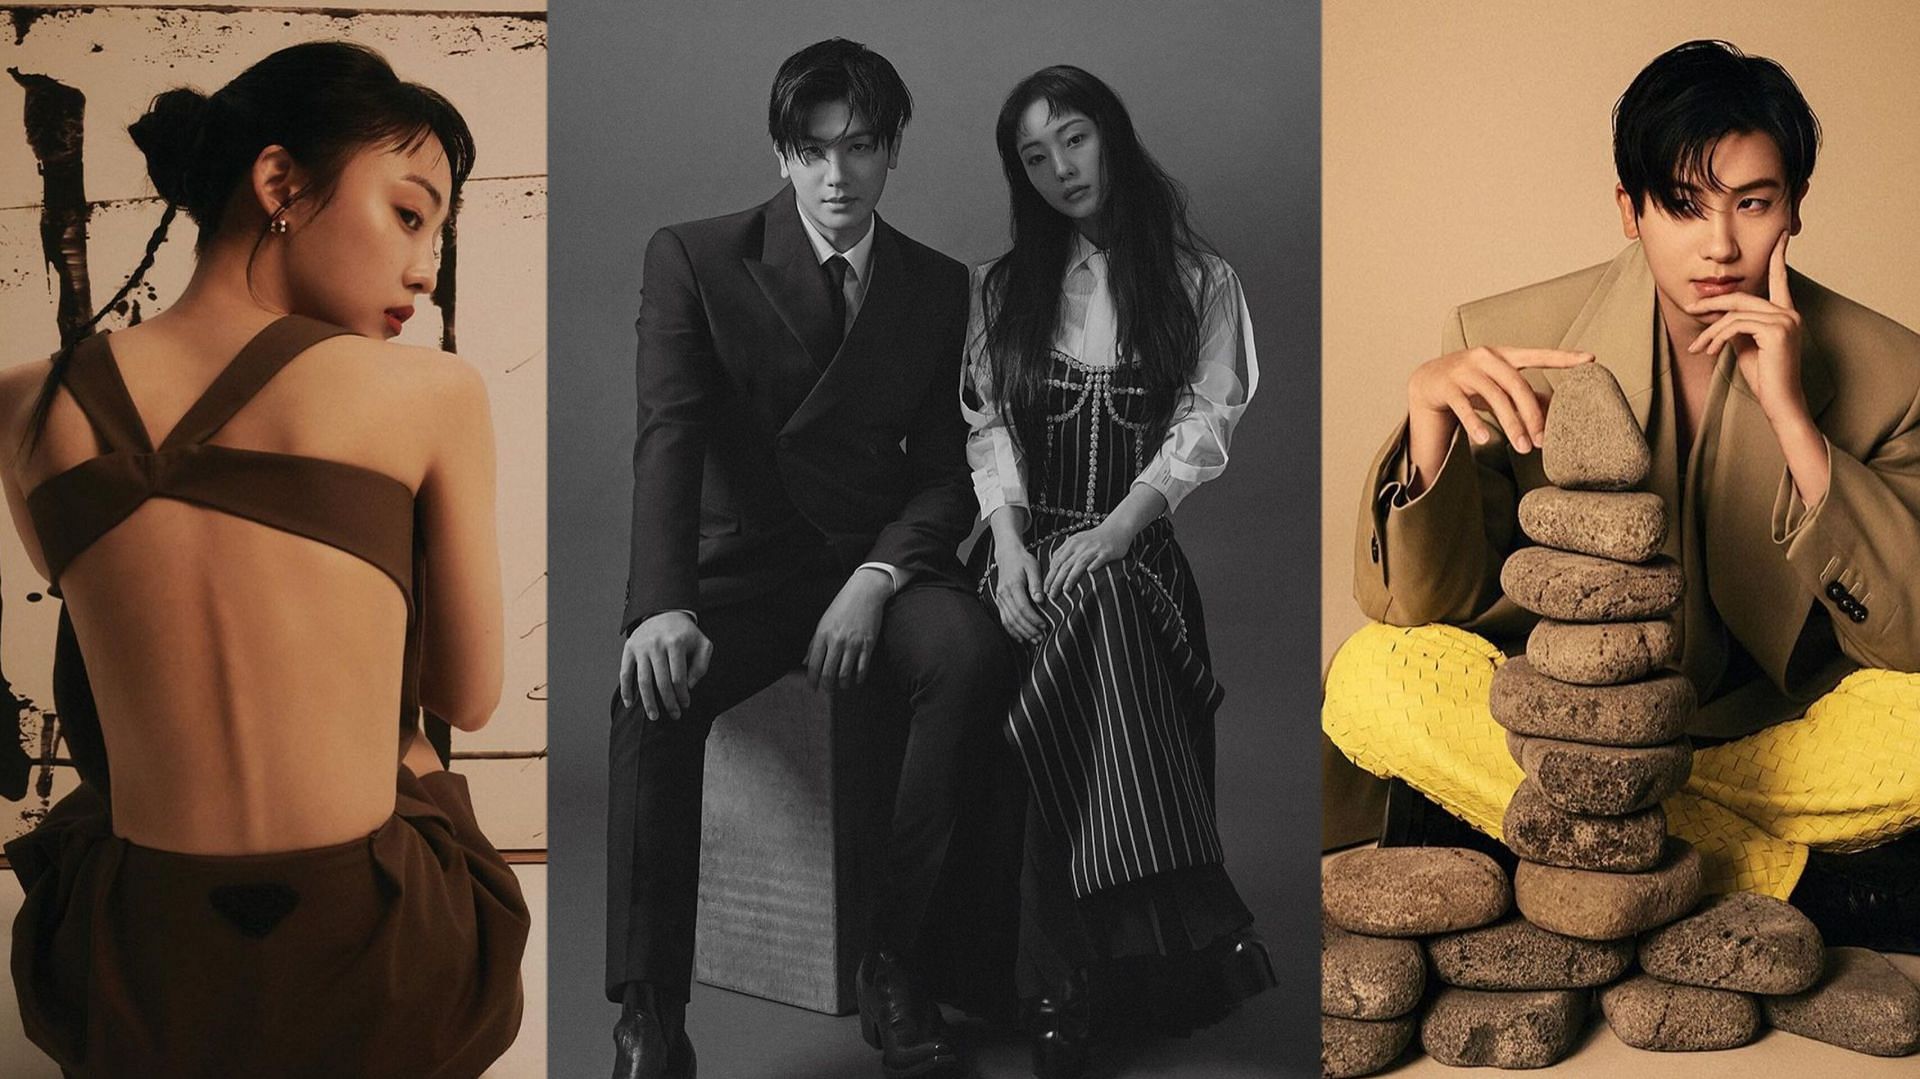 Featuring Park Hyung-sik and Jeon So-nee (Image via Elle Korea)